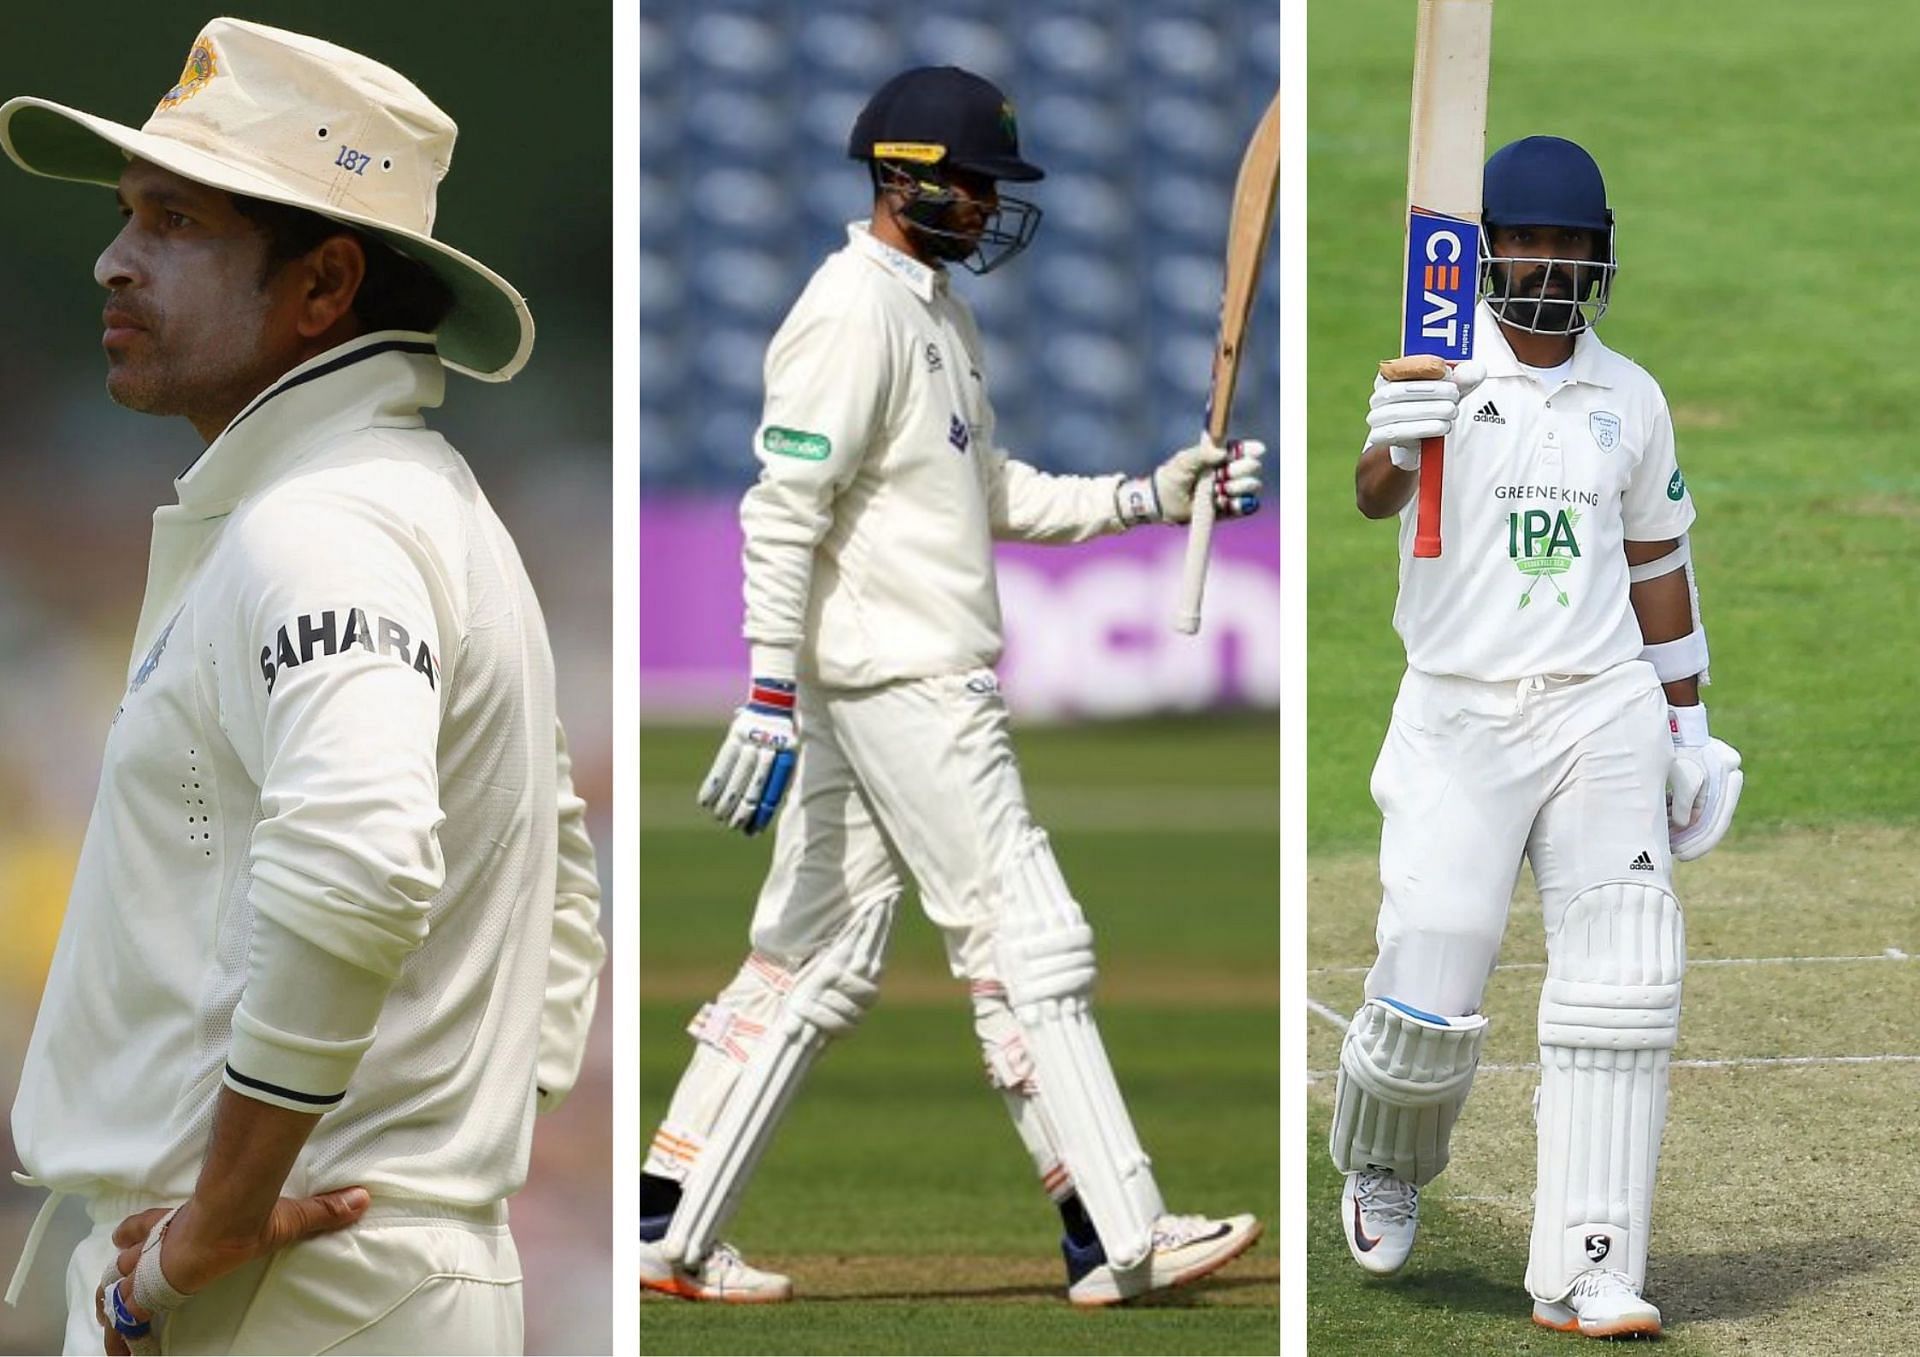 A number of Indians have taken part in the County Championship in England over the years (Picture Credits: Getty Images; Twitter/ Glamorgan Cricket; Getty Images)